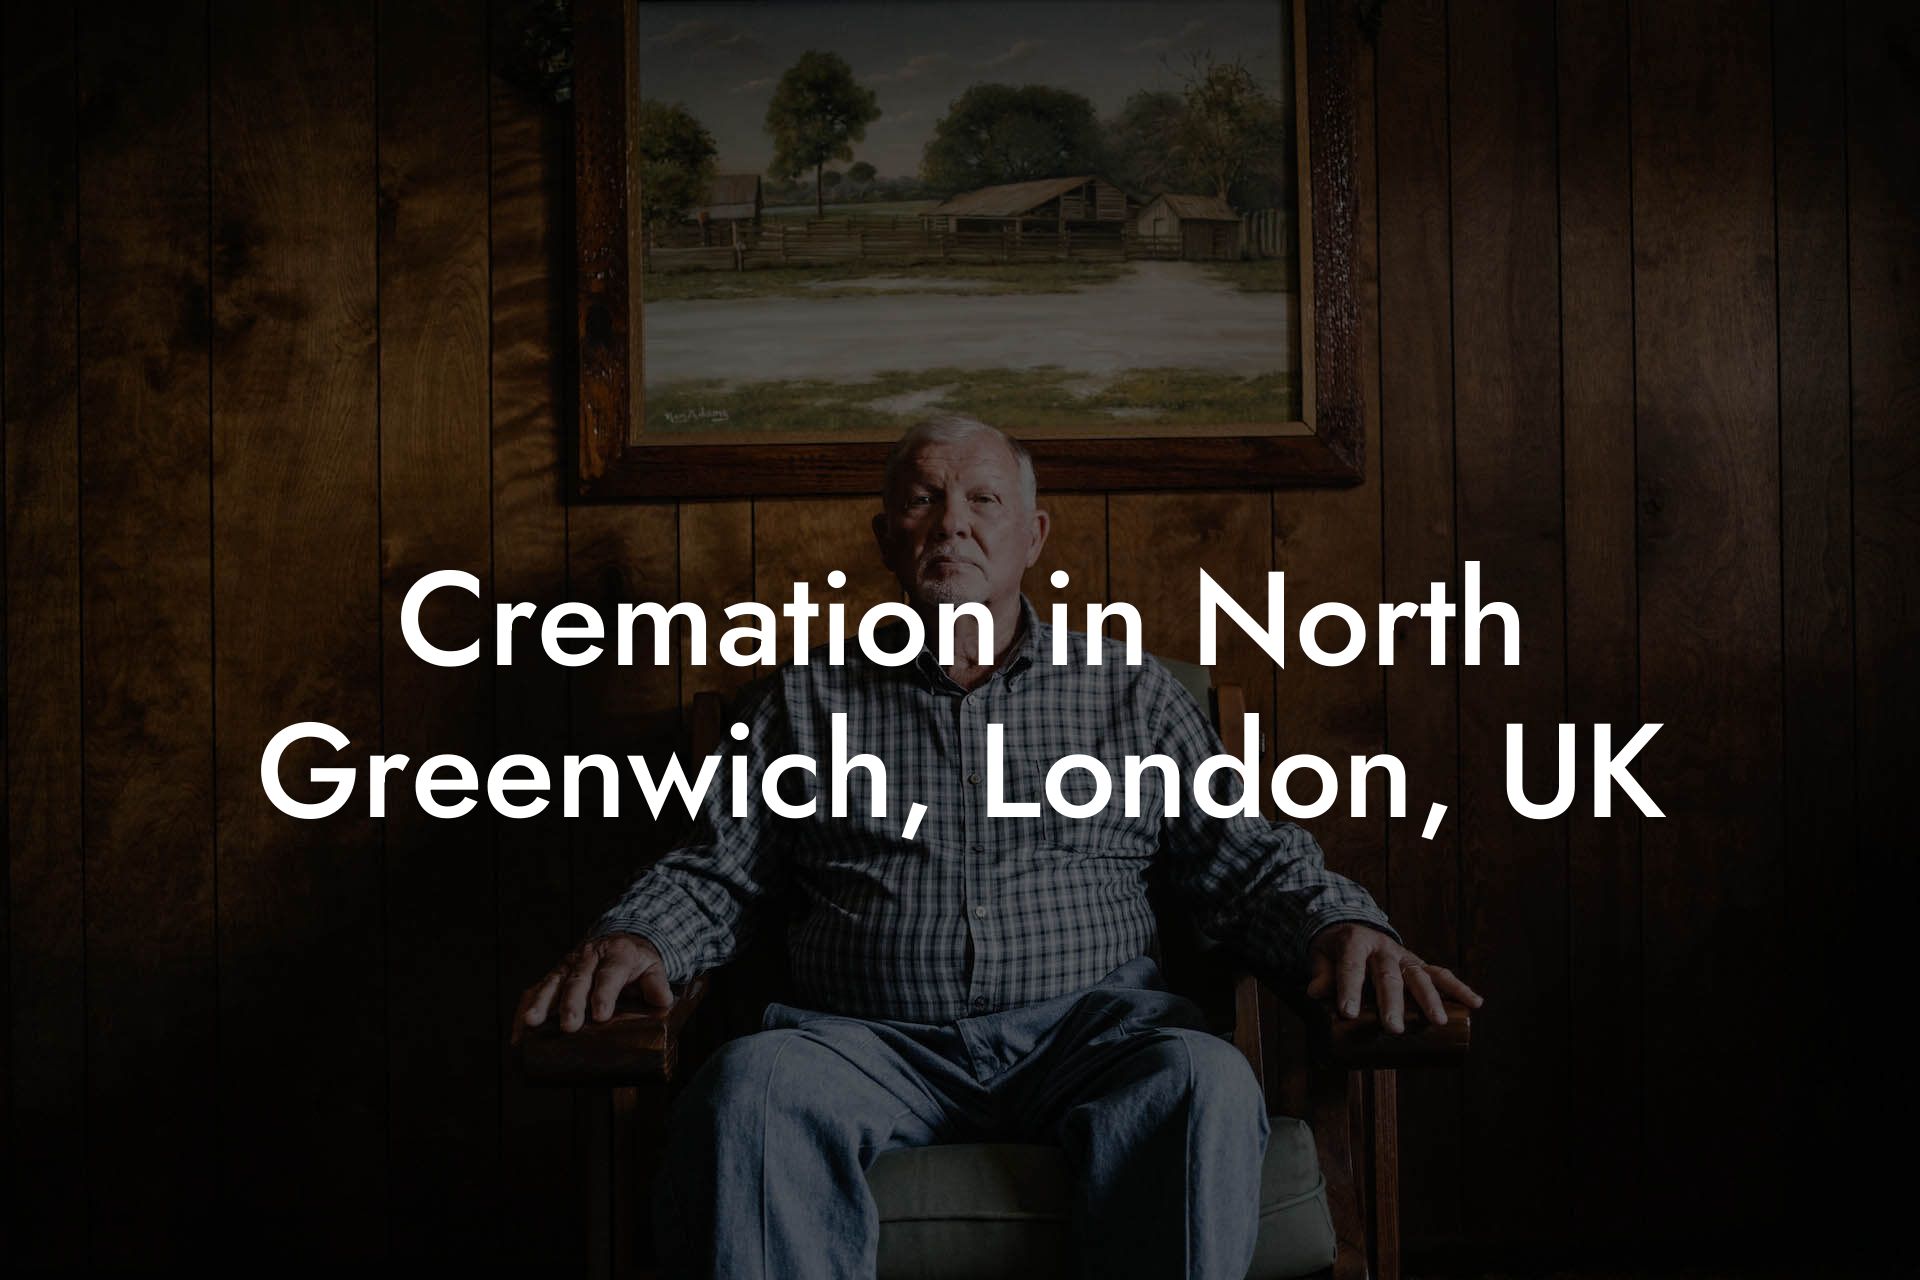 Cremation in North Greenwich, London, UK